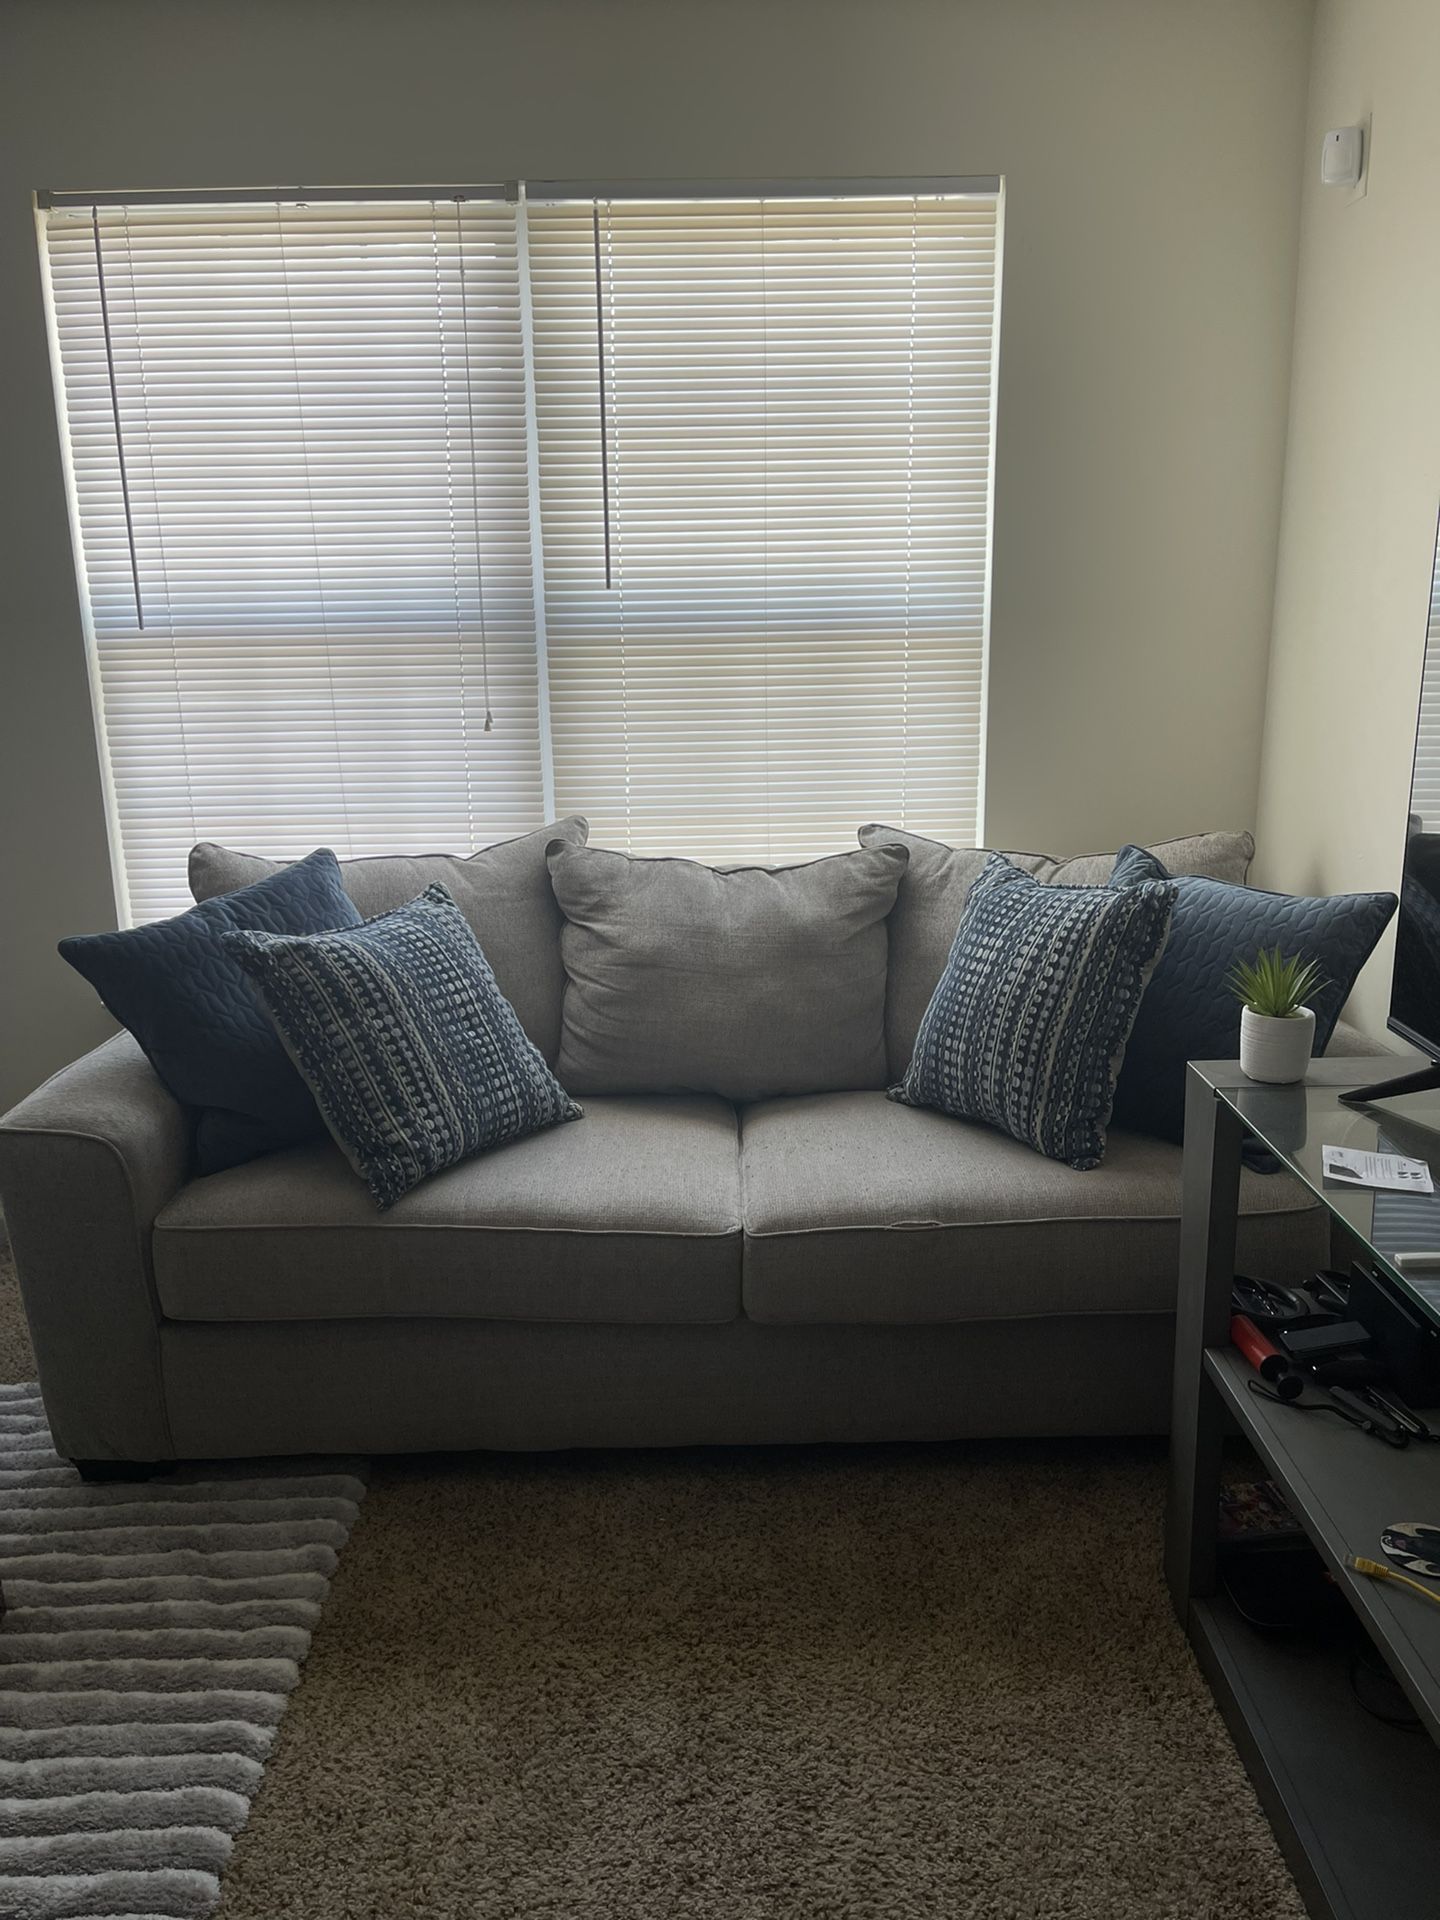 Light Beige/gray Couch